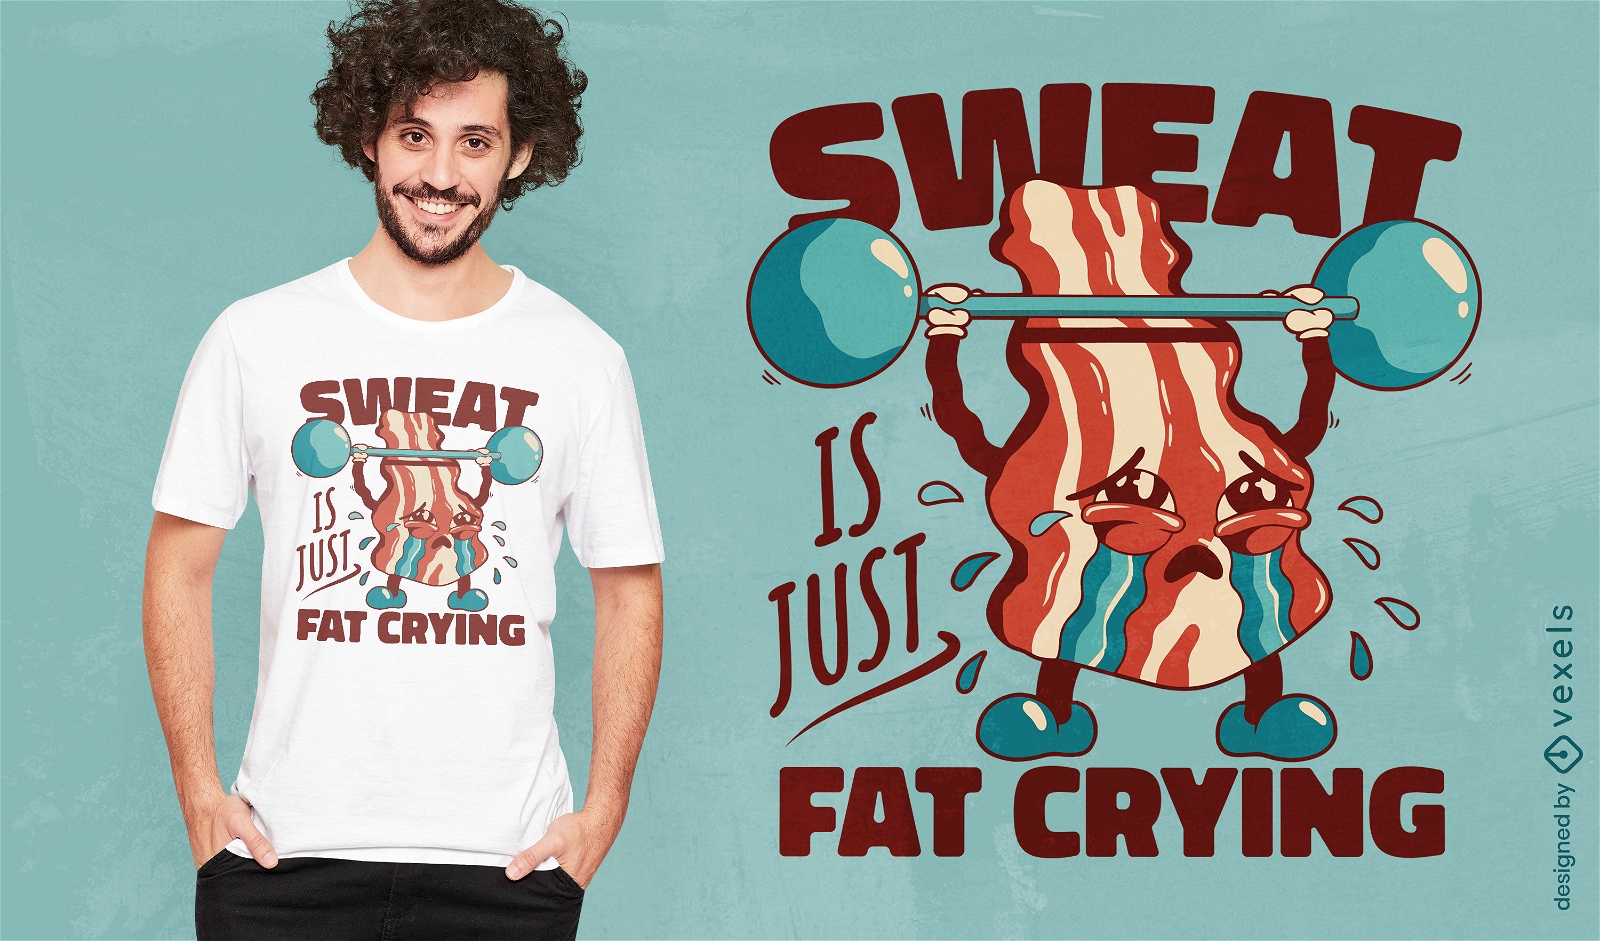 Bacon lifting weights funny t-shirt design